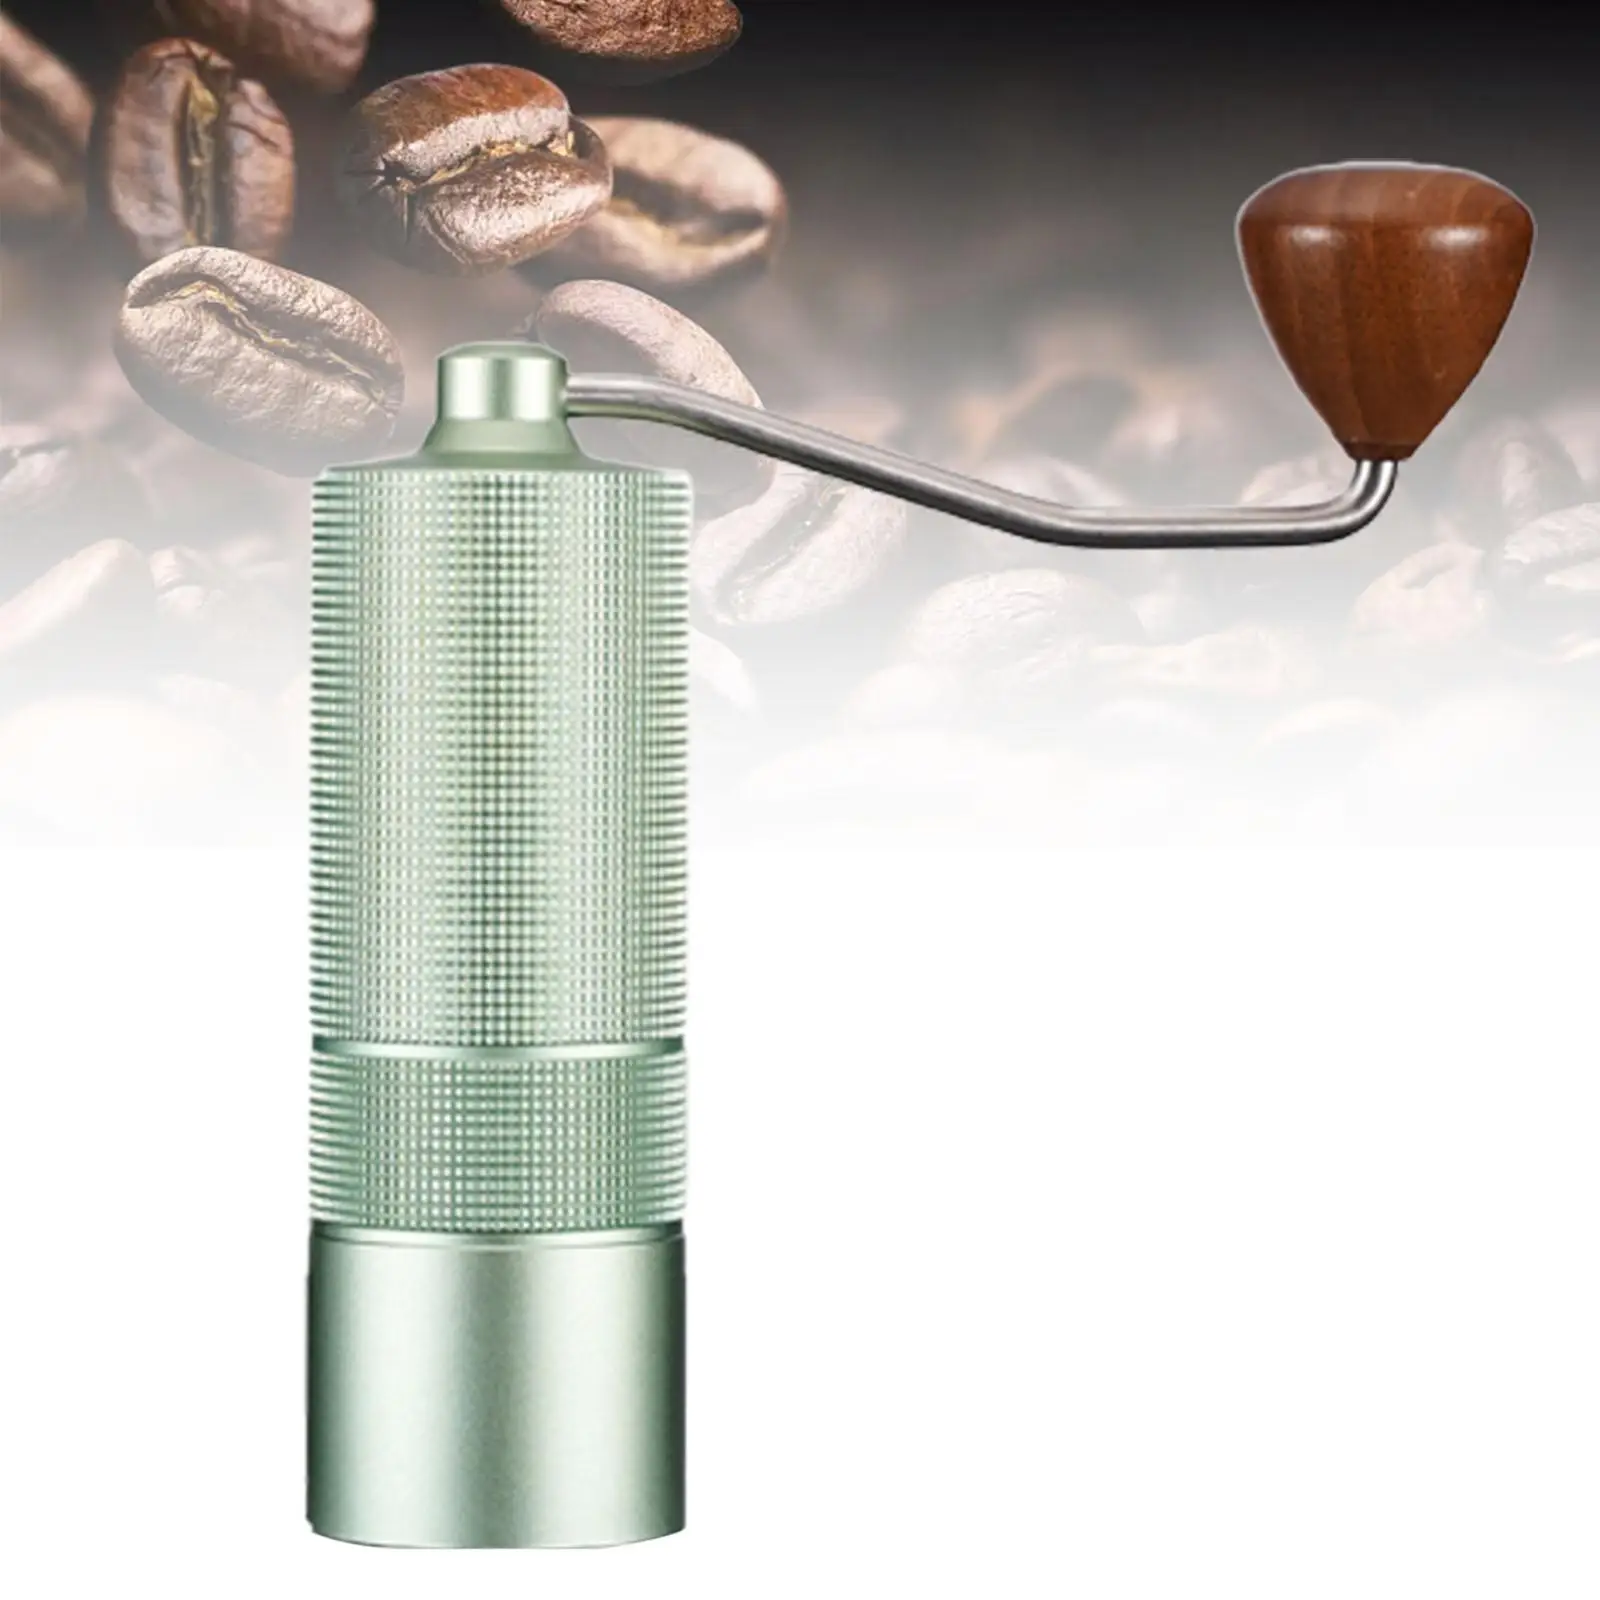 Portable Manual Coffee Grinder Espresso Hand Grinder with Adjustable Coarseness Settings Hand Coffee Mill